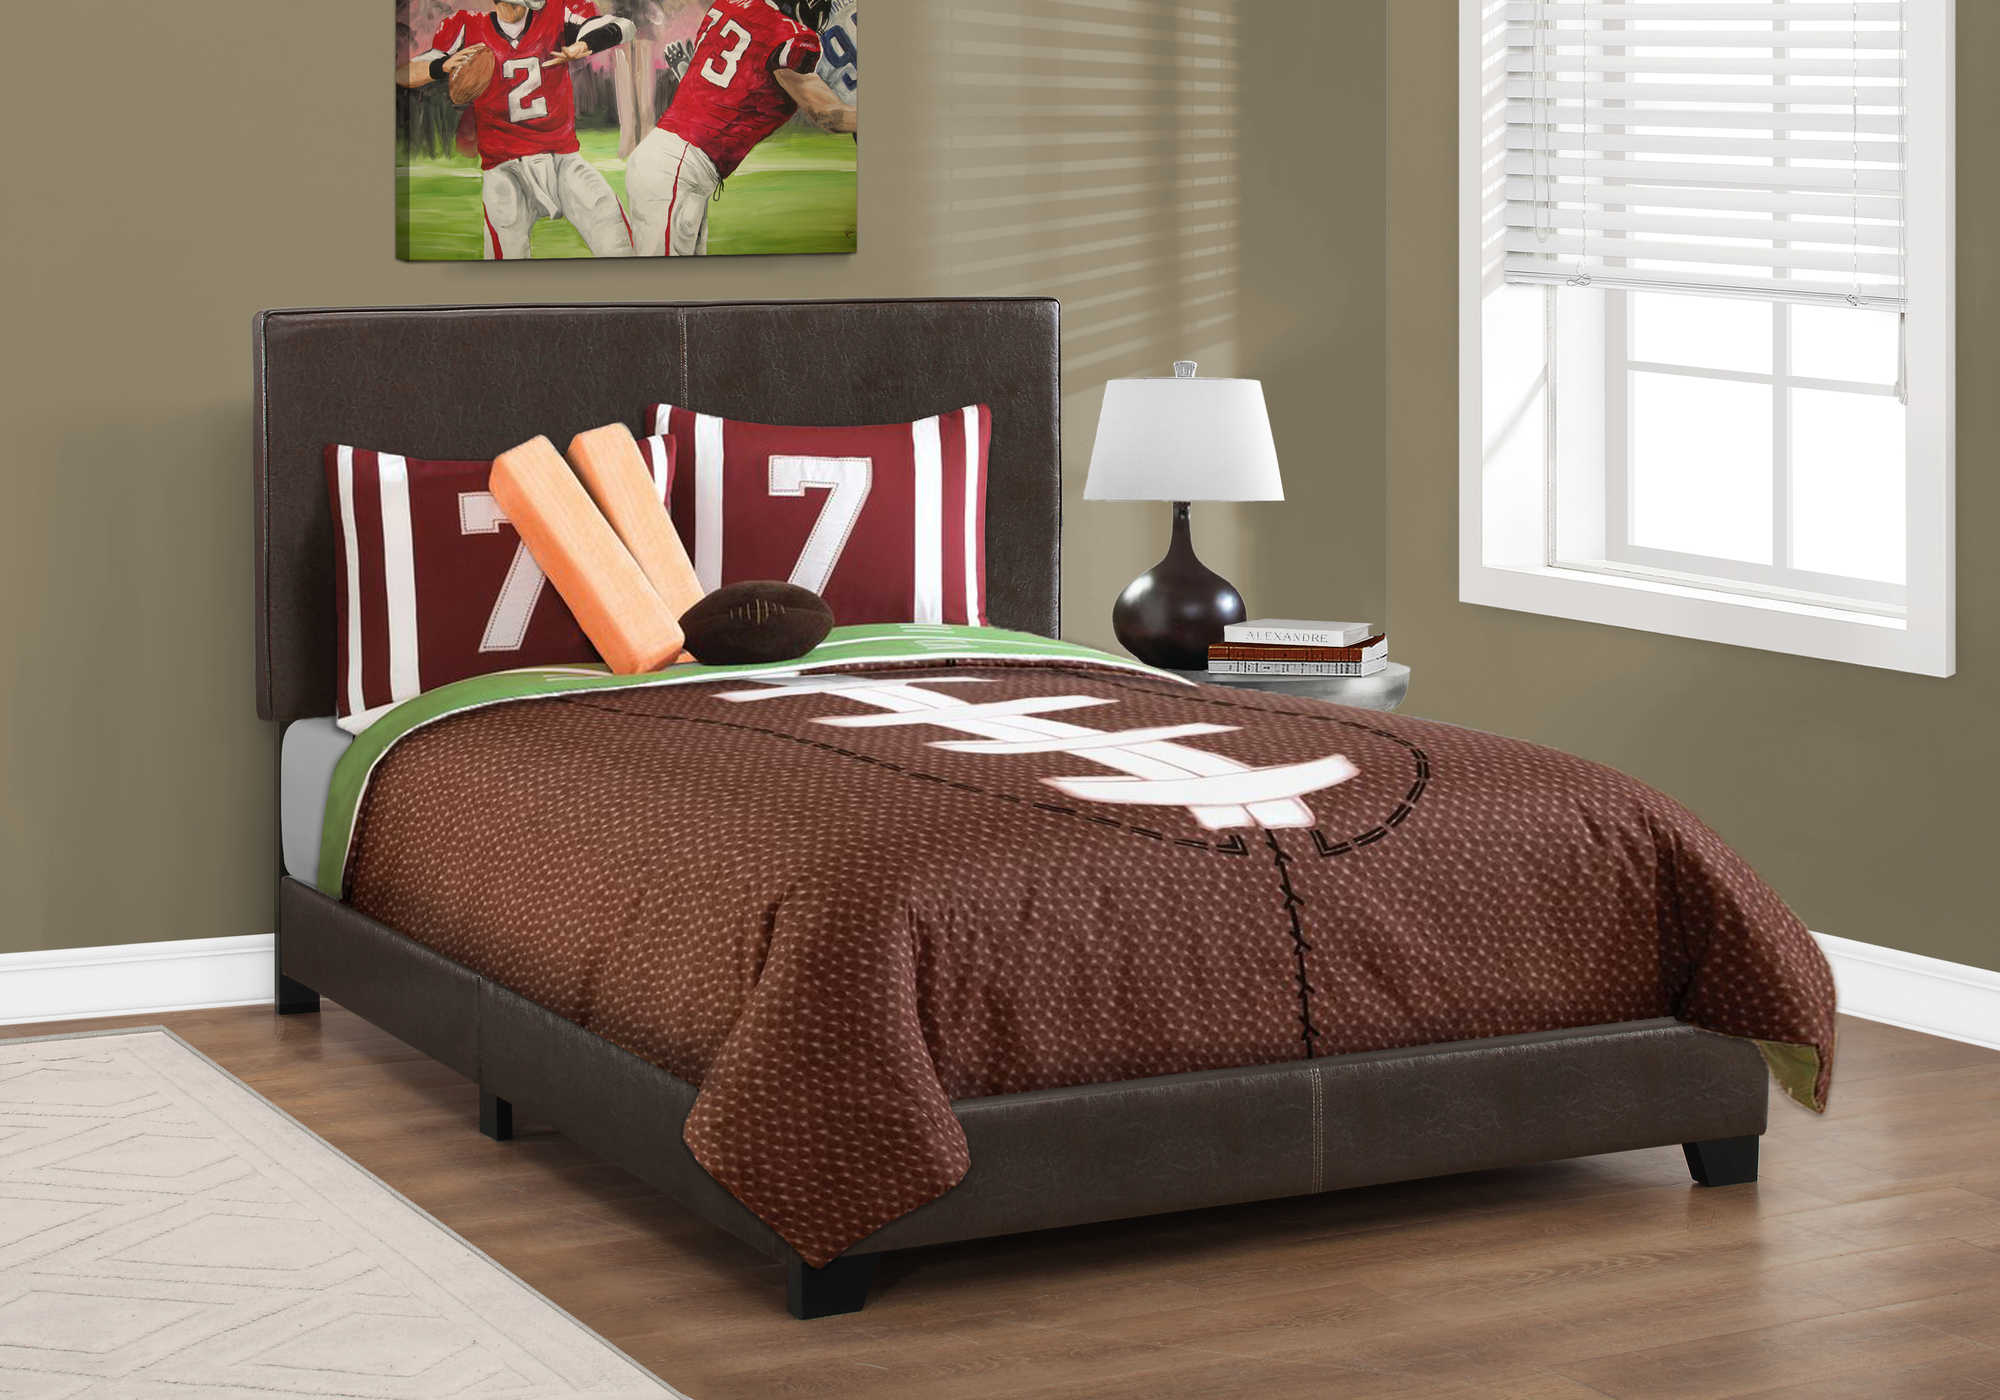 BED - FULL SIZE / DARK BROWN LEATHER-LOOK